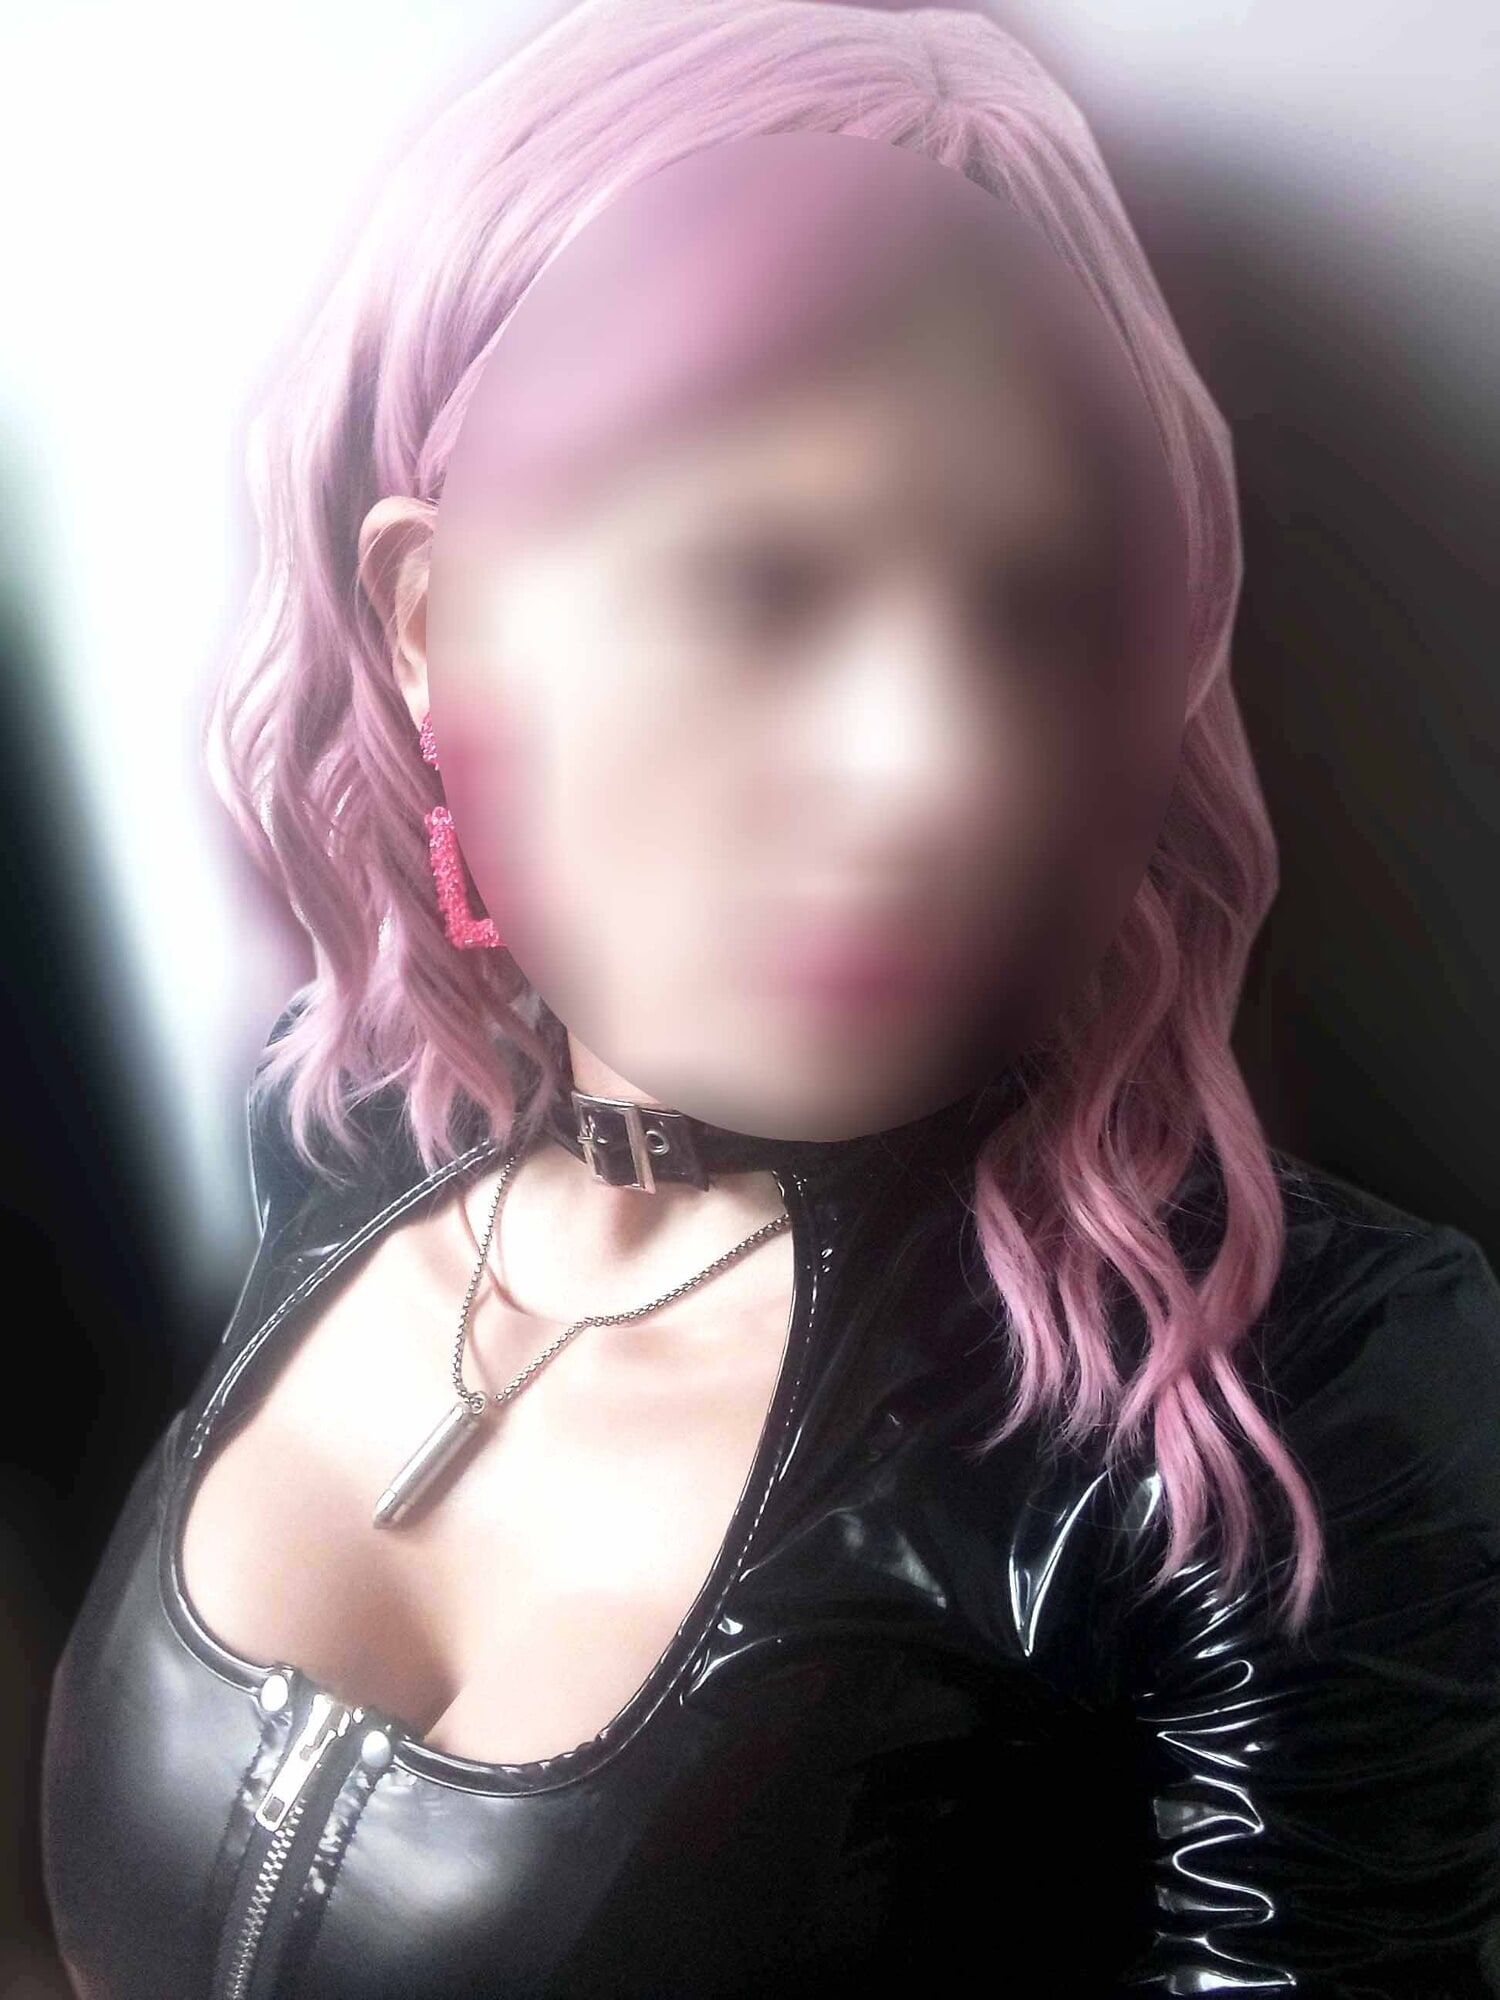 Fraulein Holly Unmasked but (blurred) #4